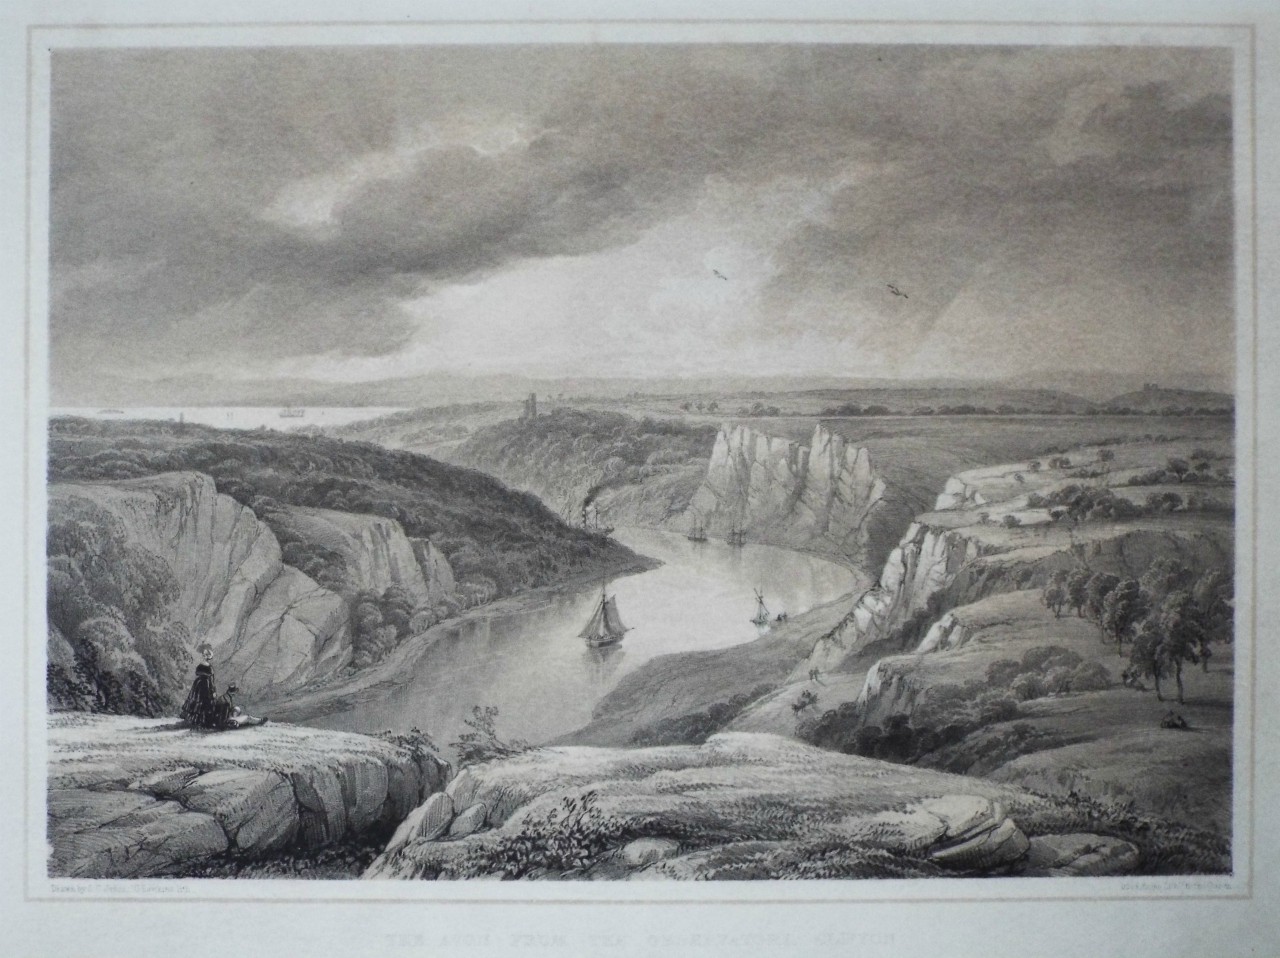 Lithograph - The Avon from the Observatory, Clifton. - Hawkins